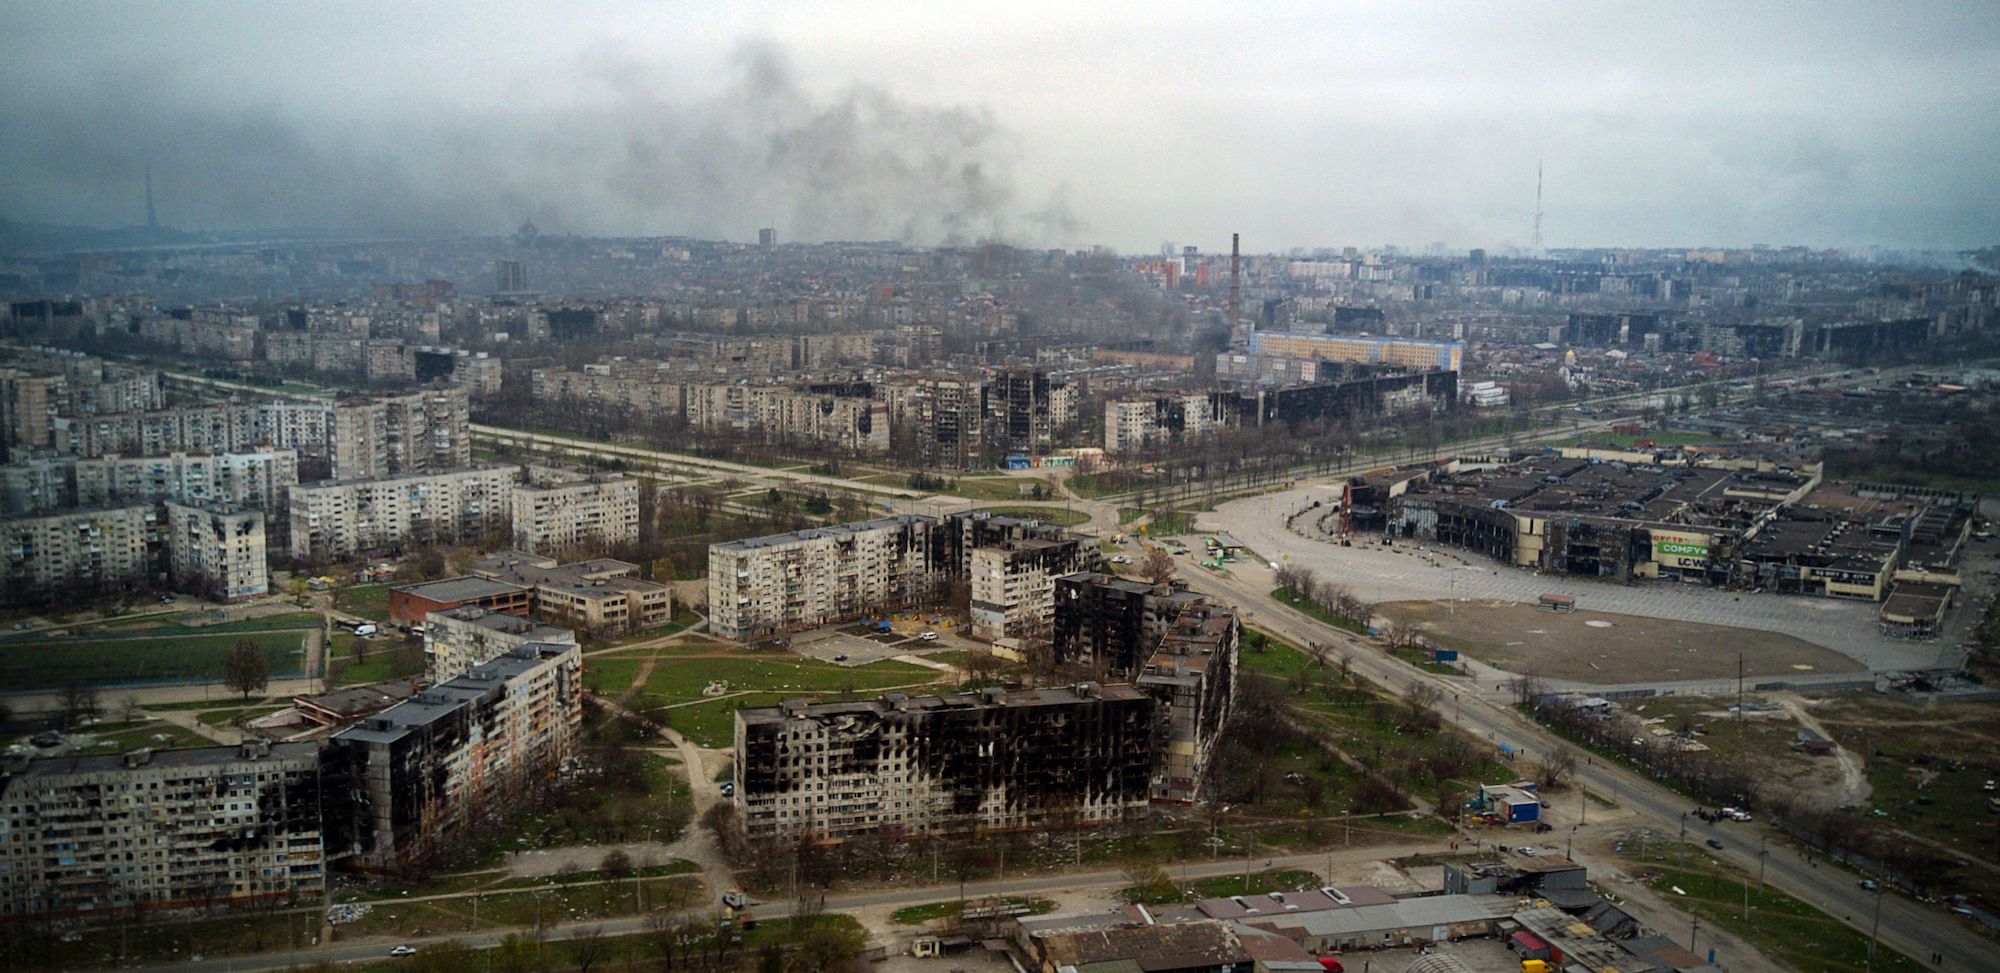 Mariupol aerial view on April 12, 2022.